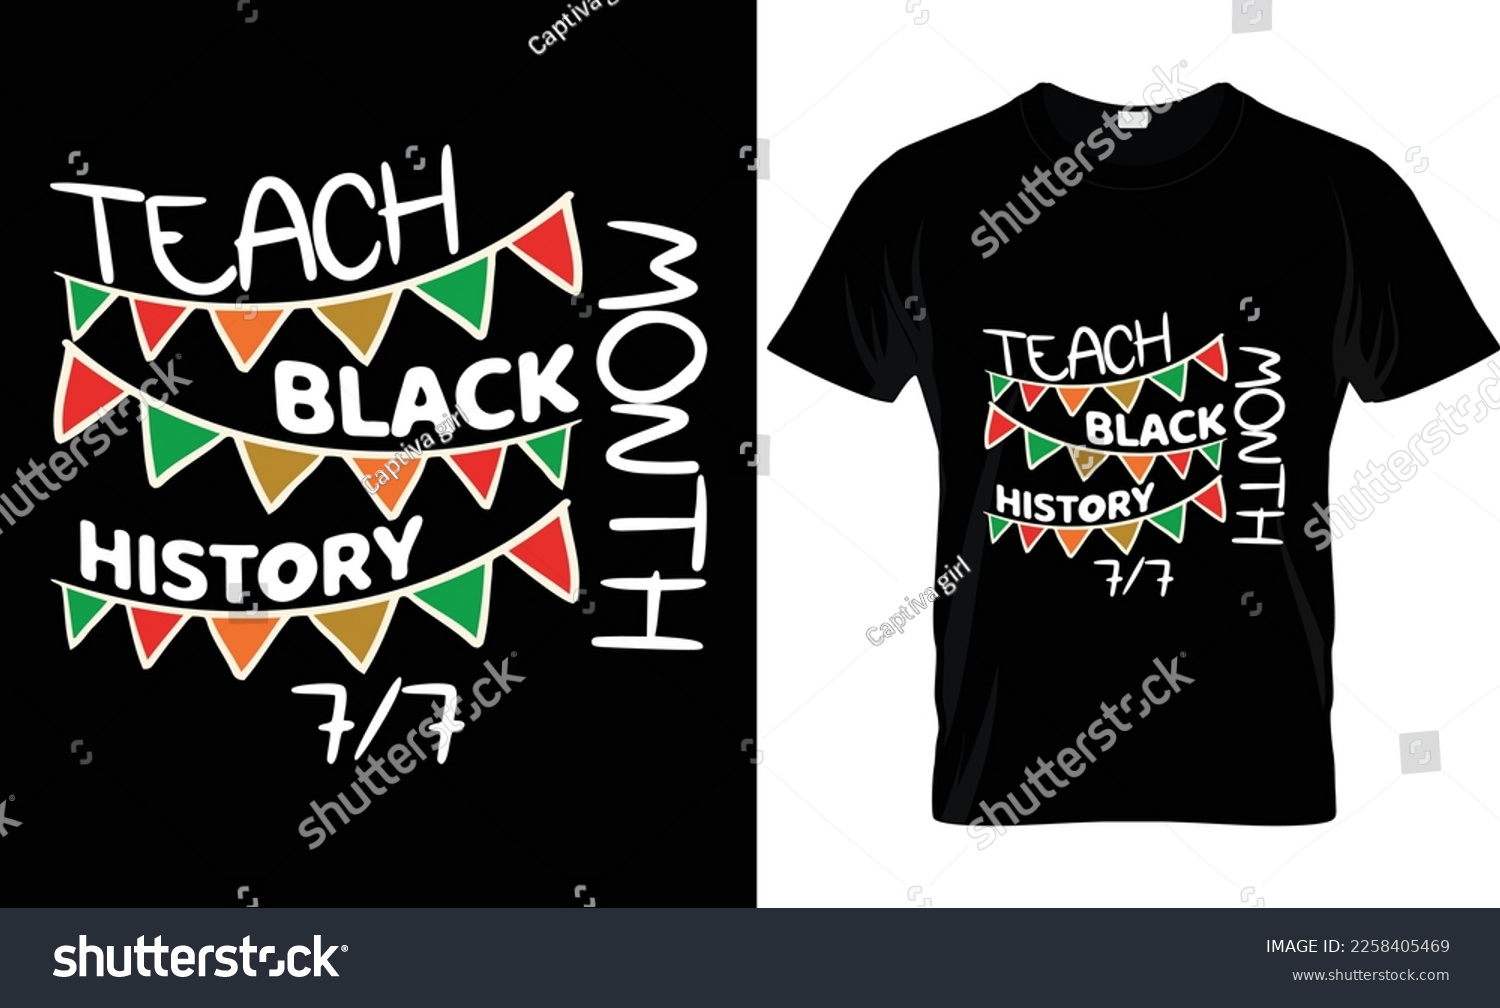 SVG of Black man t-shirt - Black History Month T-shirt and apparel design. Vector print, typography, festival, Handwritten text used for template, lustration t-shirt design graphic black history month. svg